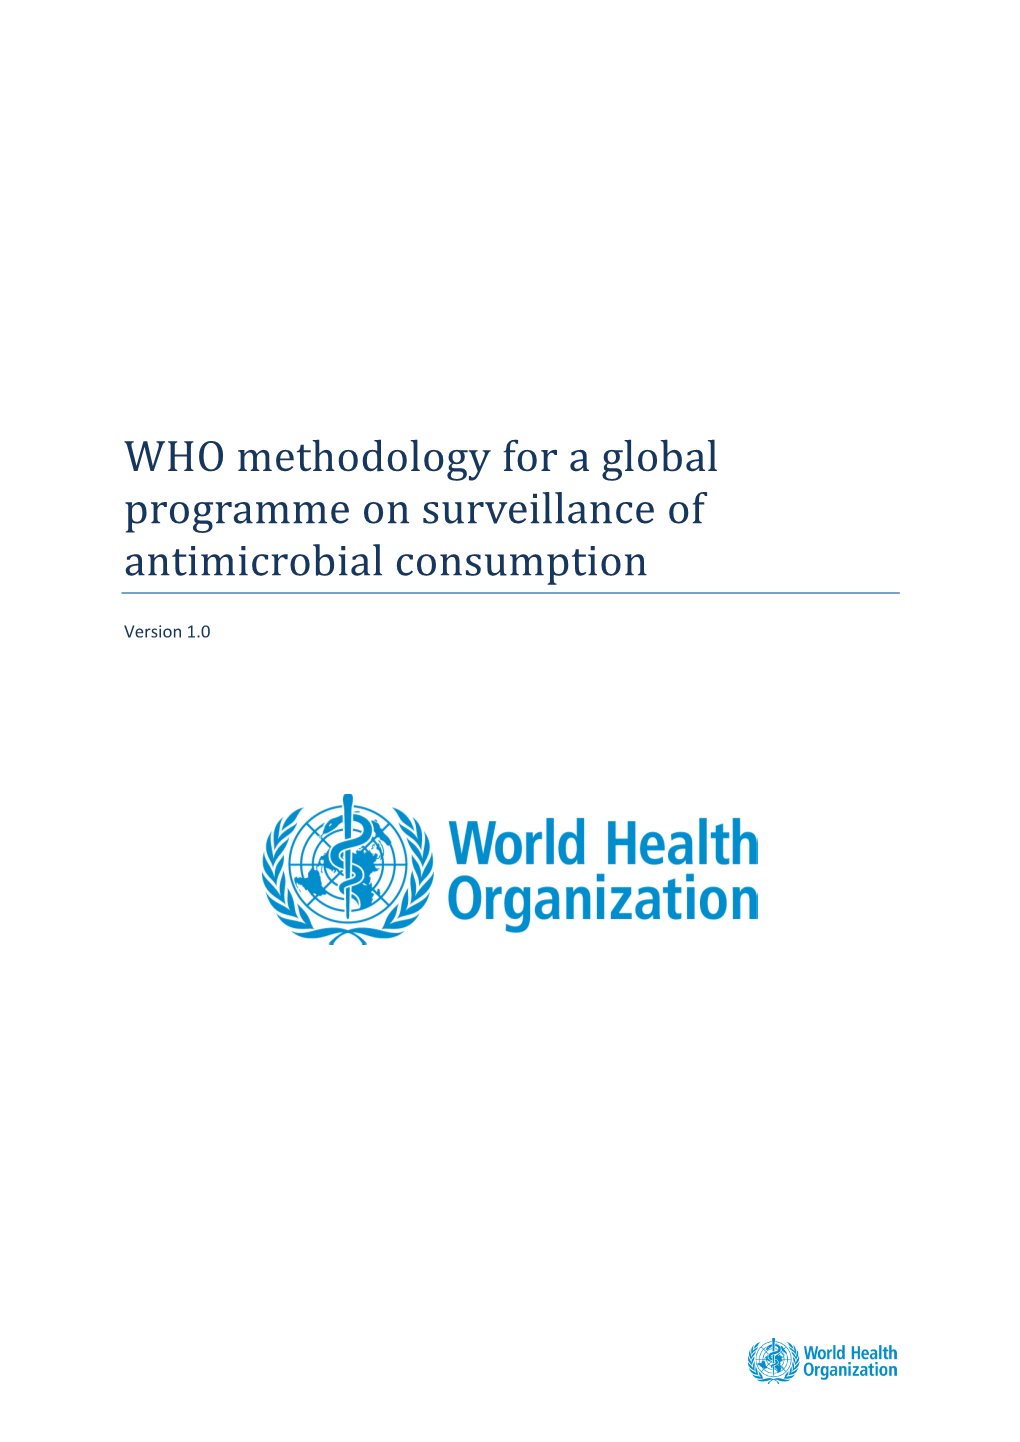 WHO Methodology for a Global Programme on Surveillance of Antimicrobial Consumption